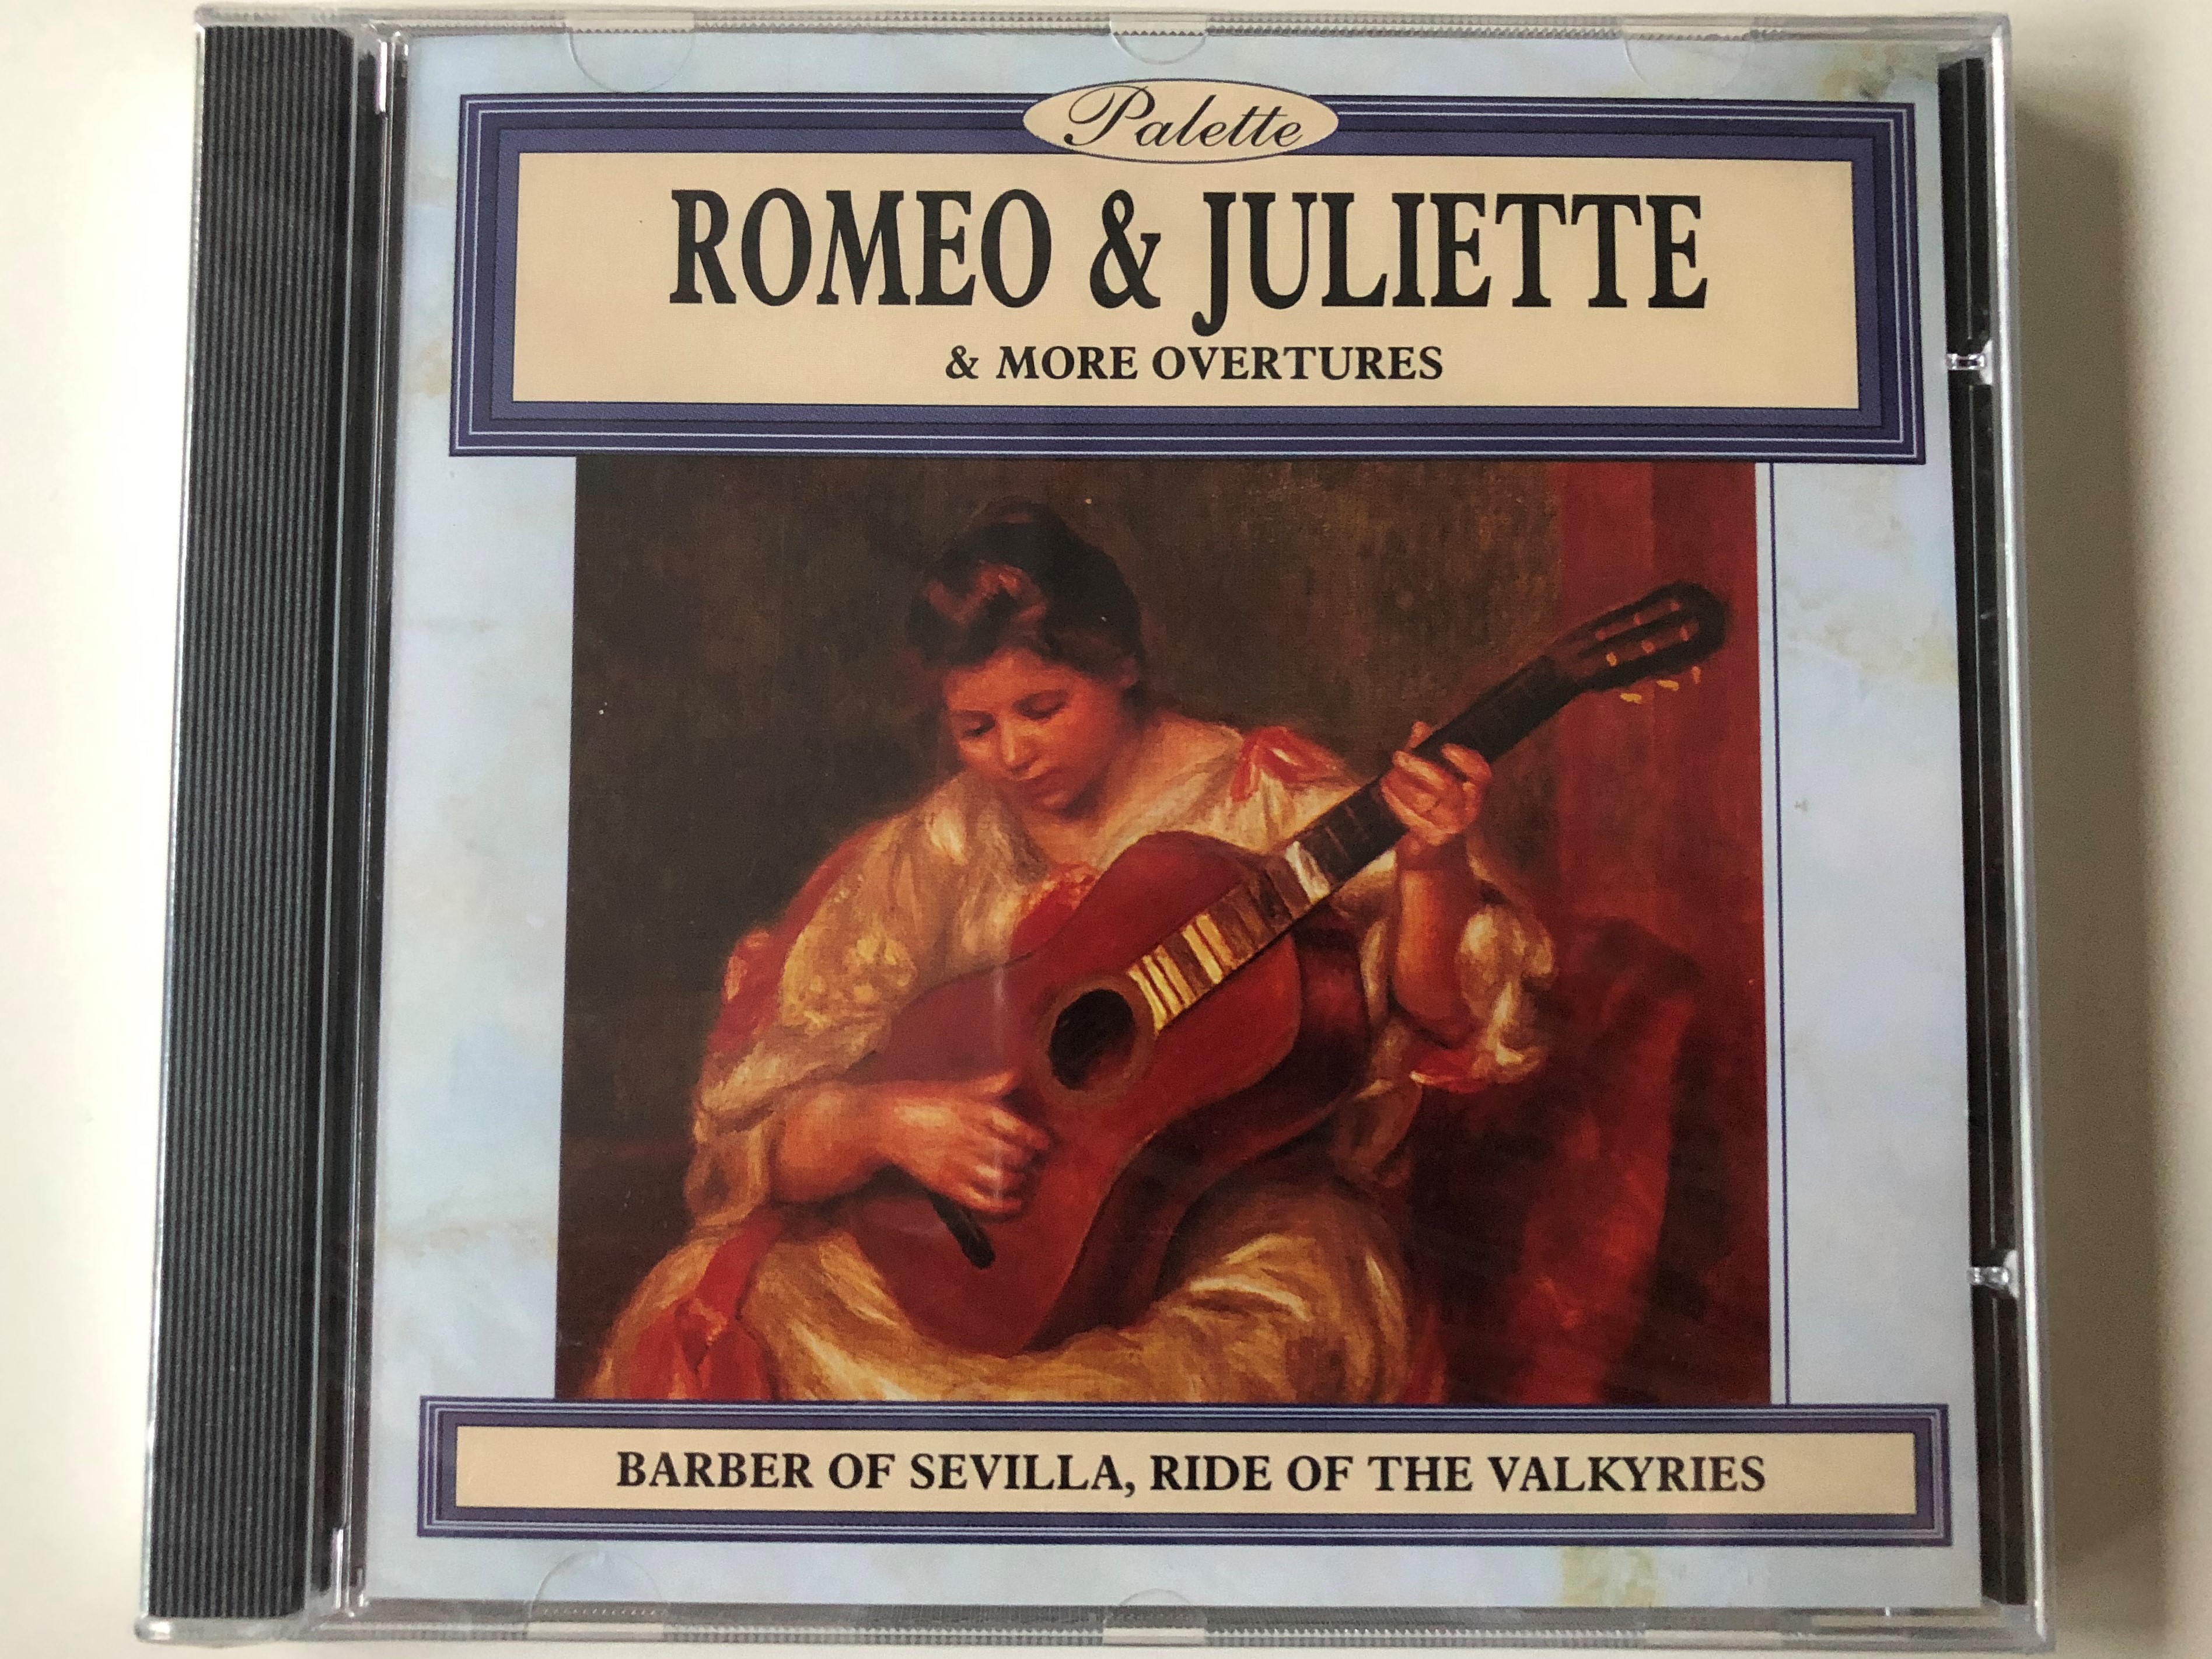 romeo-juliette-more-overtures-barber-of-sevilla-ride-of-the-valkyries-palette-audio-cd-pal083-1-.jpg